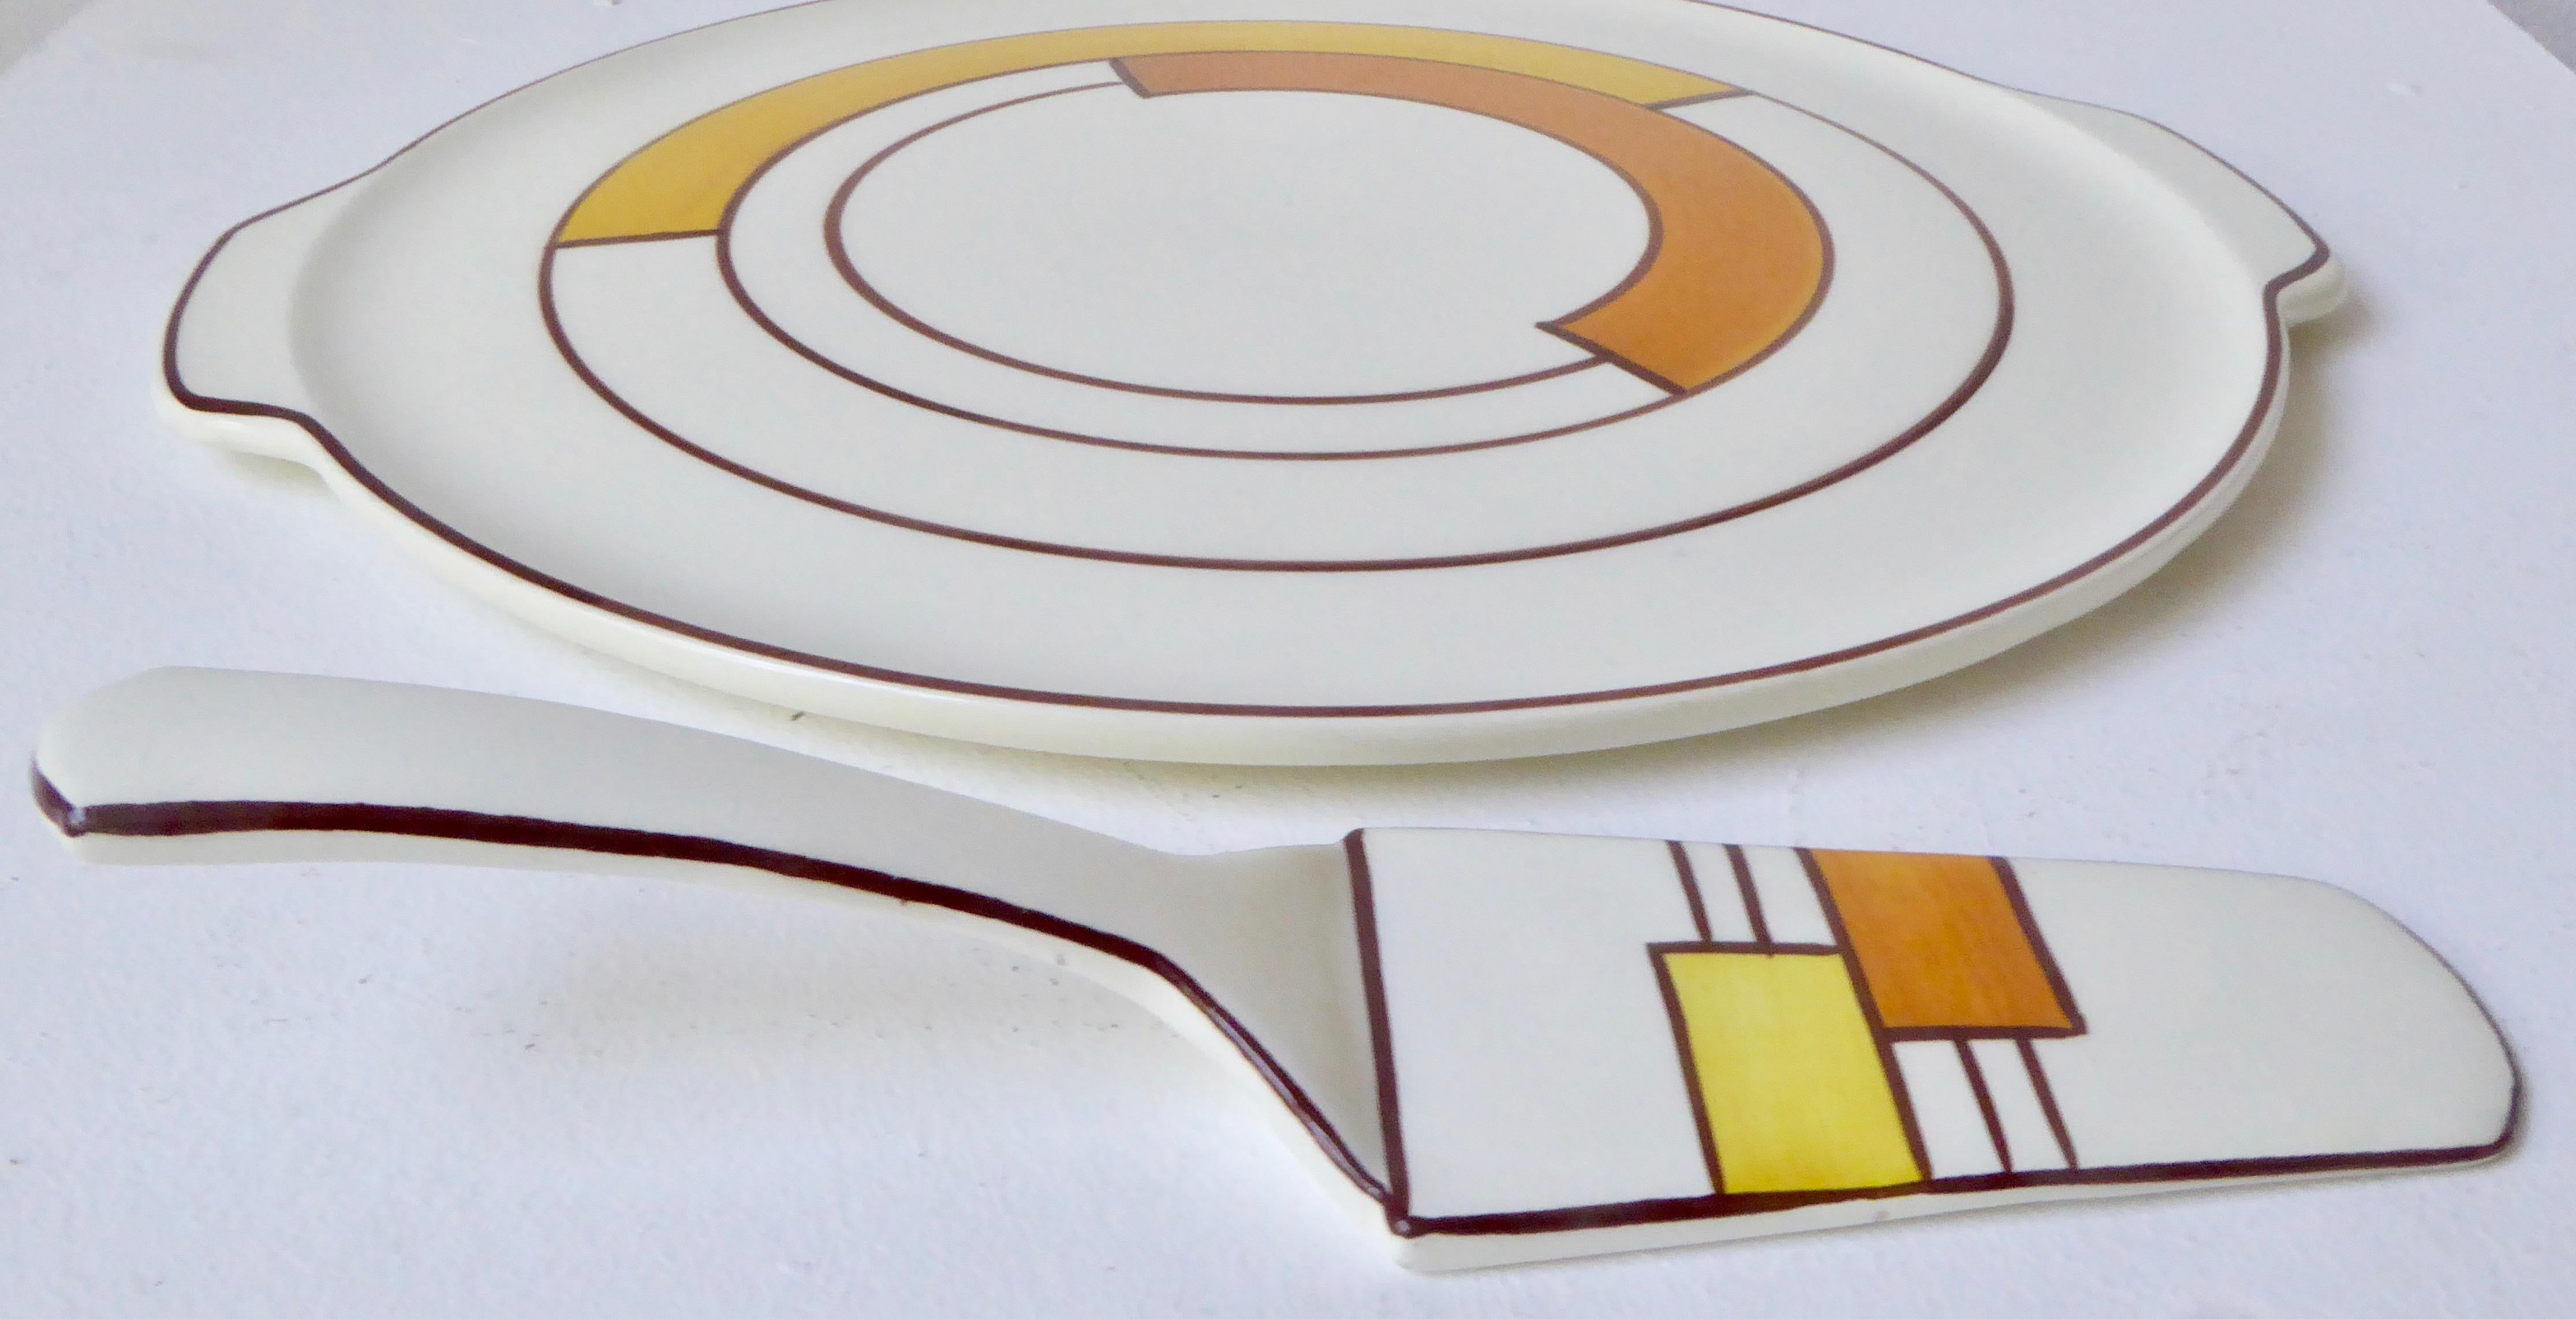 Cake Plate and Server by Eva Zeisel for Schramberg Bauhaus 1